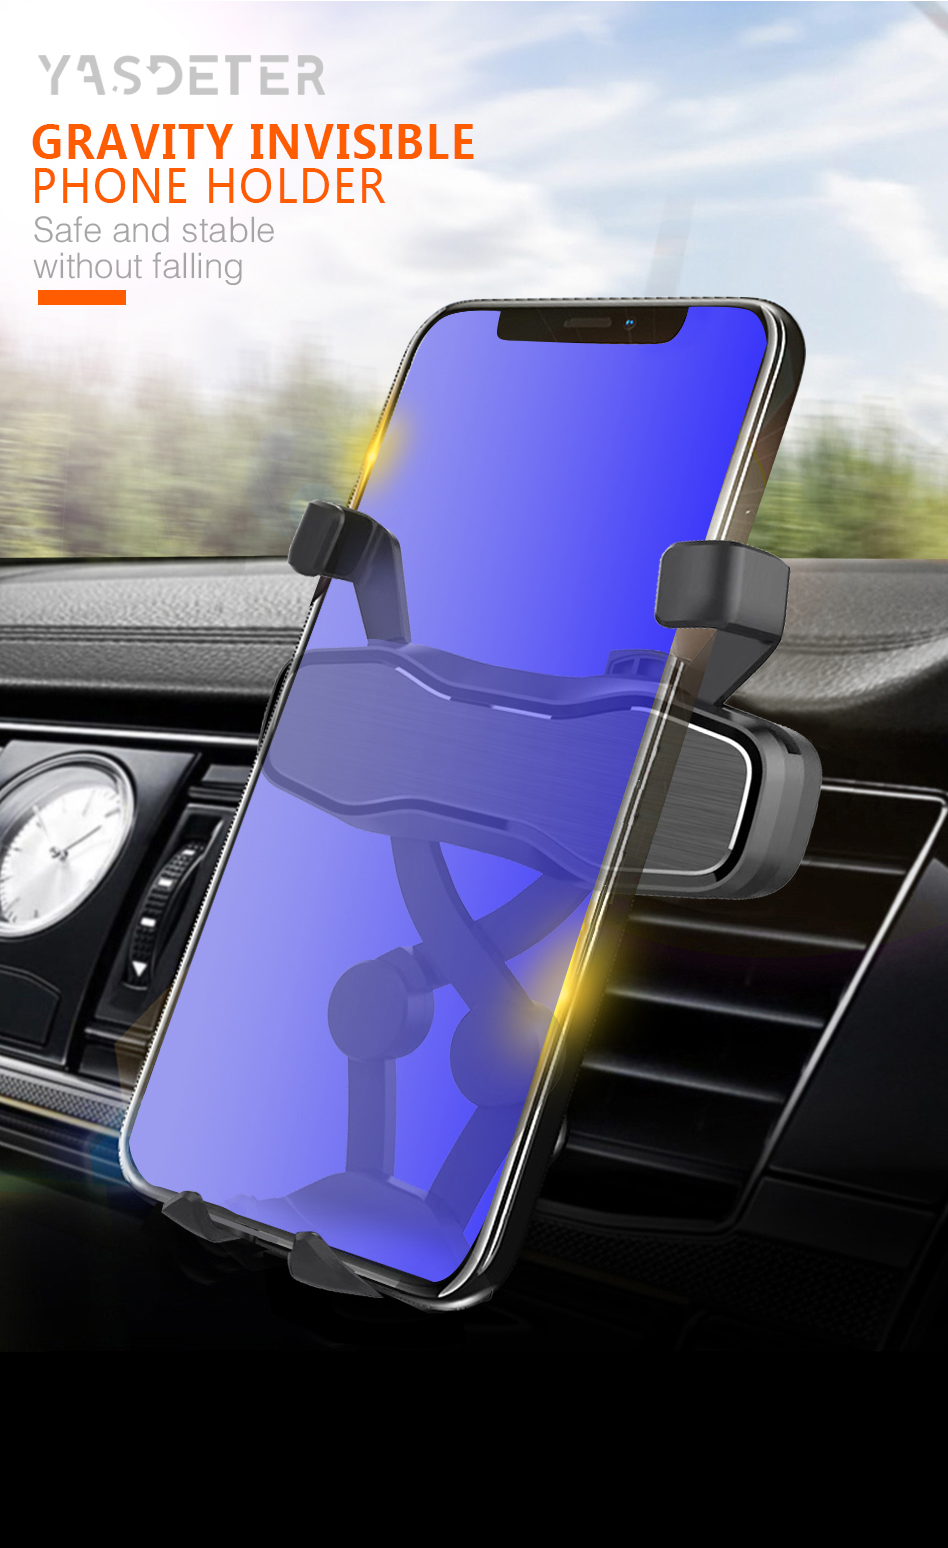 Bakeey-Metal-Gravity-Linkage-Air-Vent-Car-Phone-Holder-For-40-65-Inch-Smart-Phone-Samsung-iPhone-Xia-1556461-1